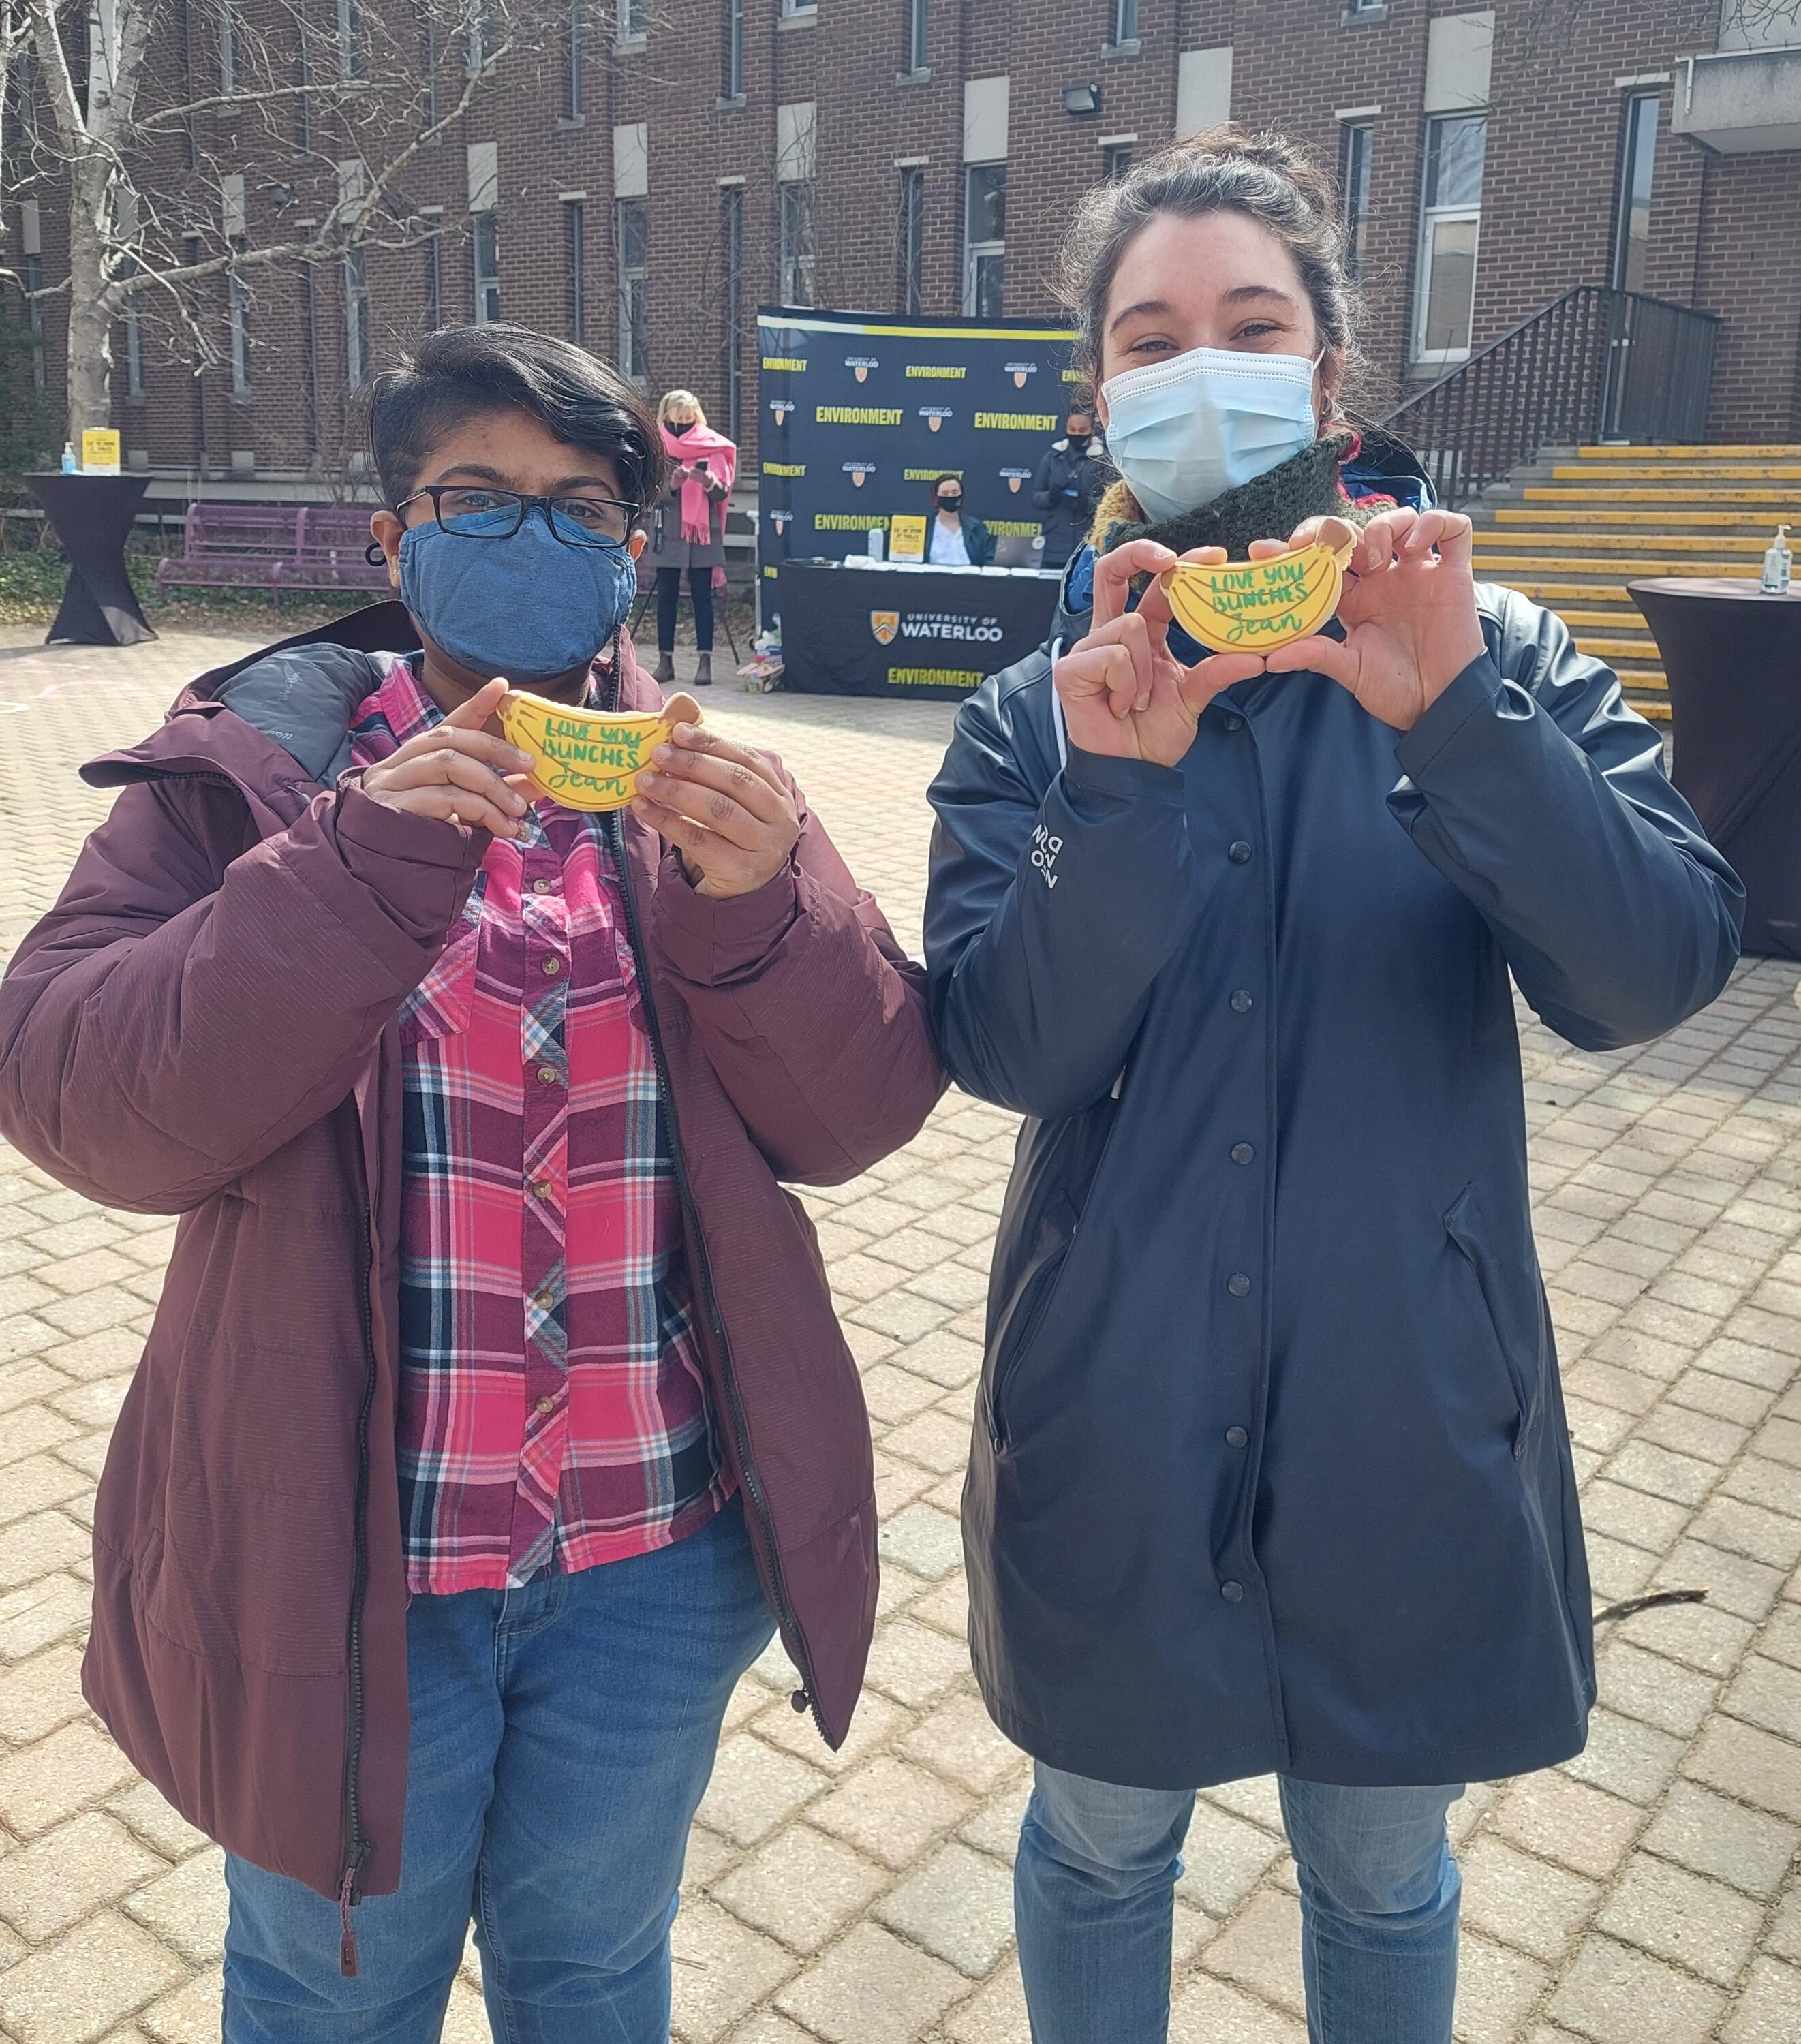 Two students holding banana shaped cookies